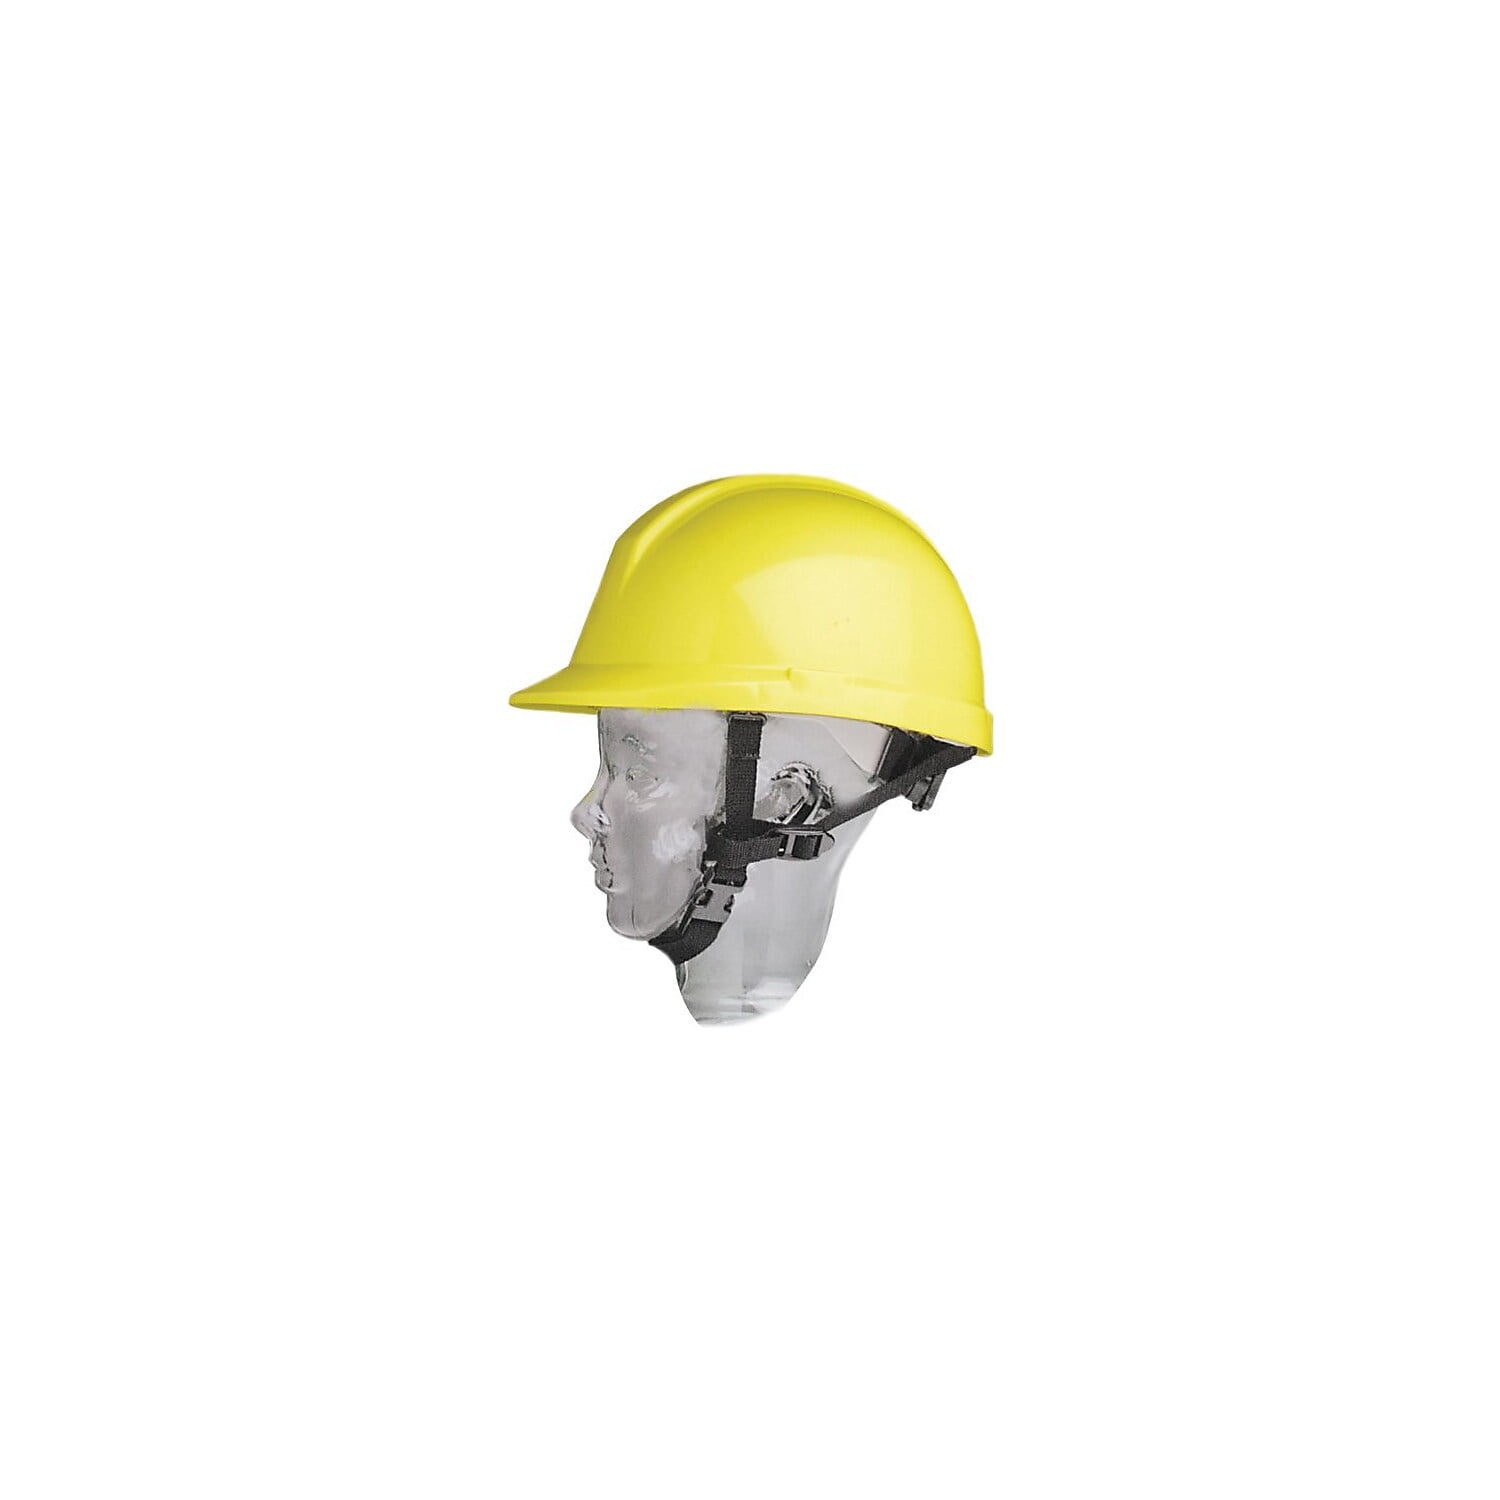 2Pcs Safety Helmet Chin Strap with Chin Guard For Hardhat Hard Hats Helmet 